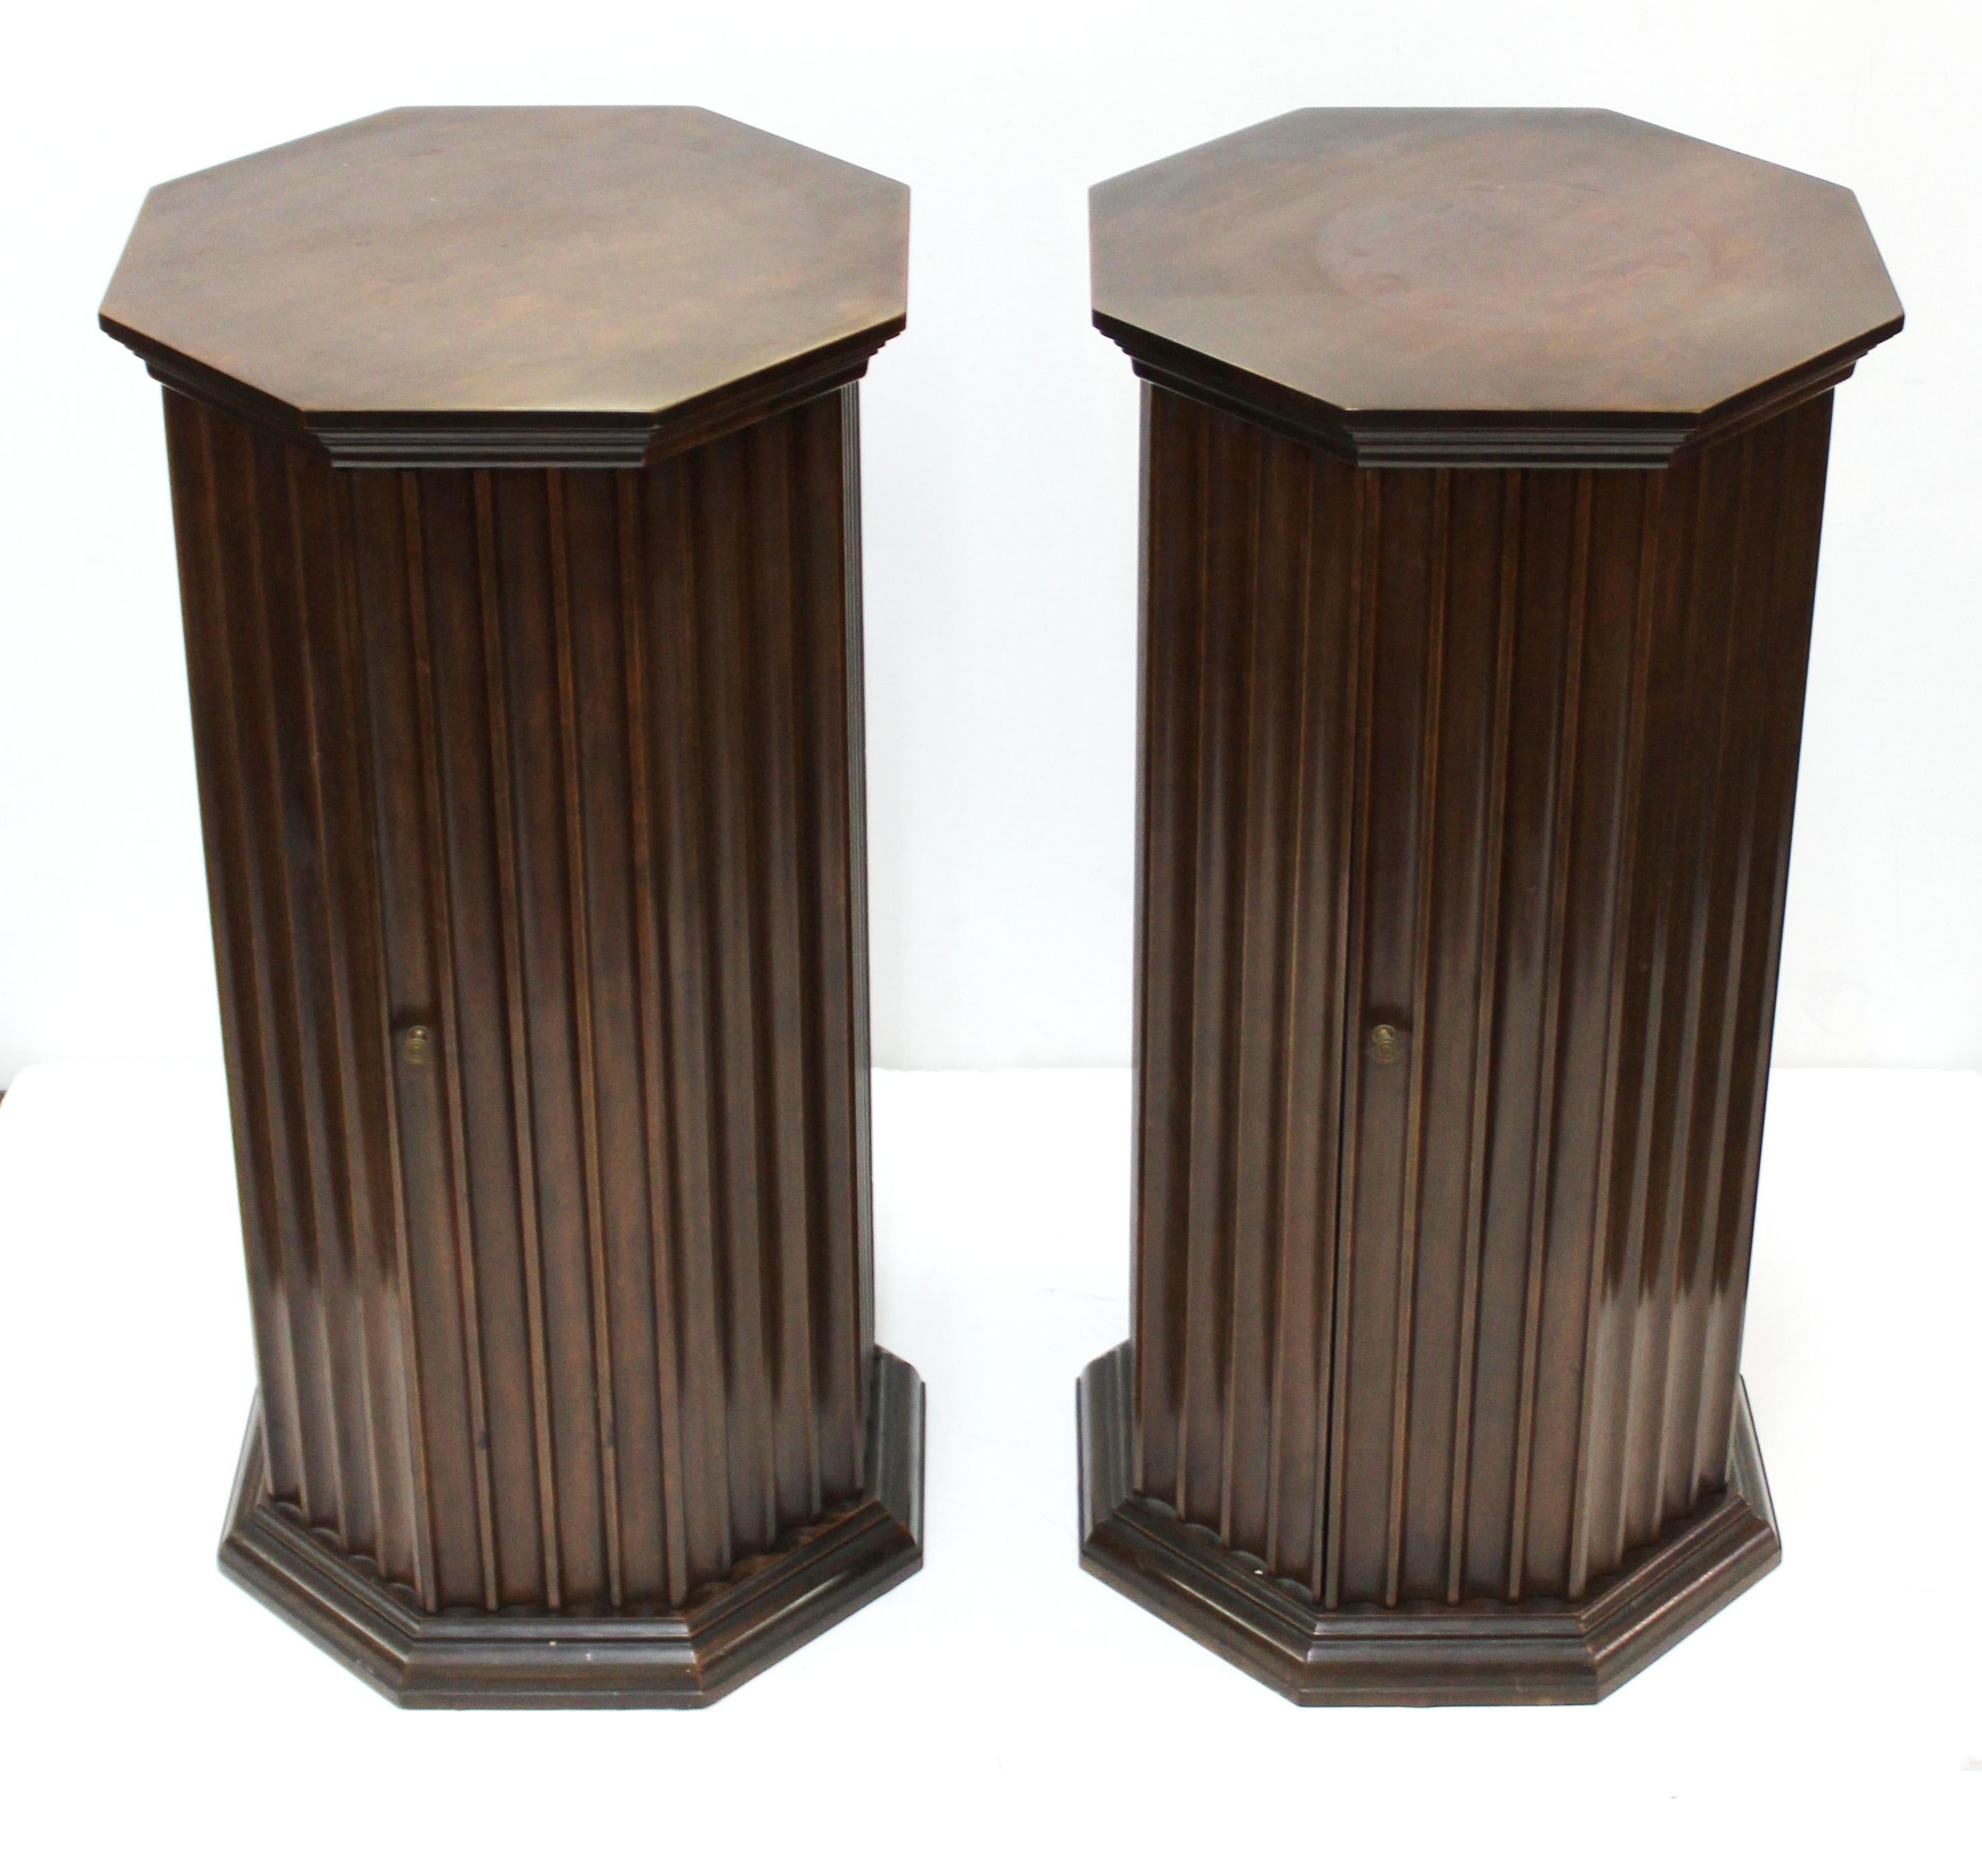 American Mid-Century Modern Octagonal Fluted Mahogany Pedestals with Doors and Shelves